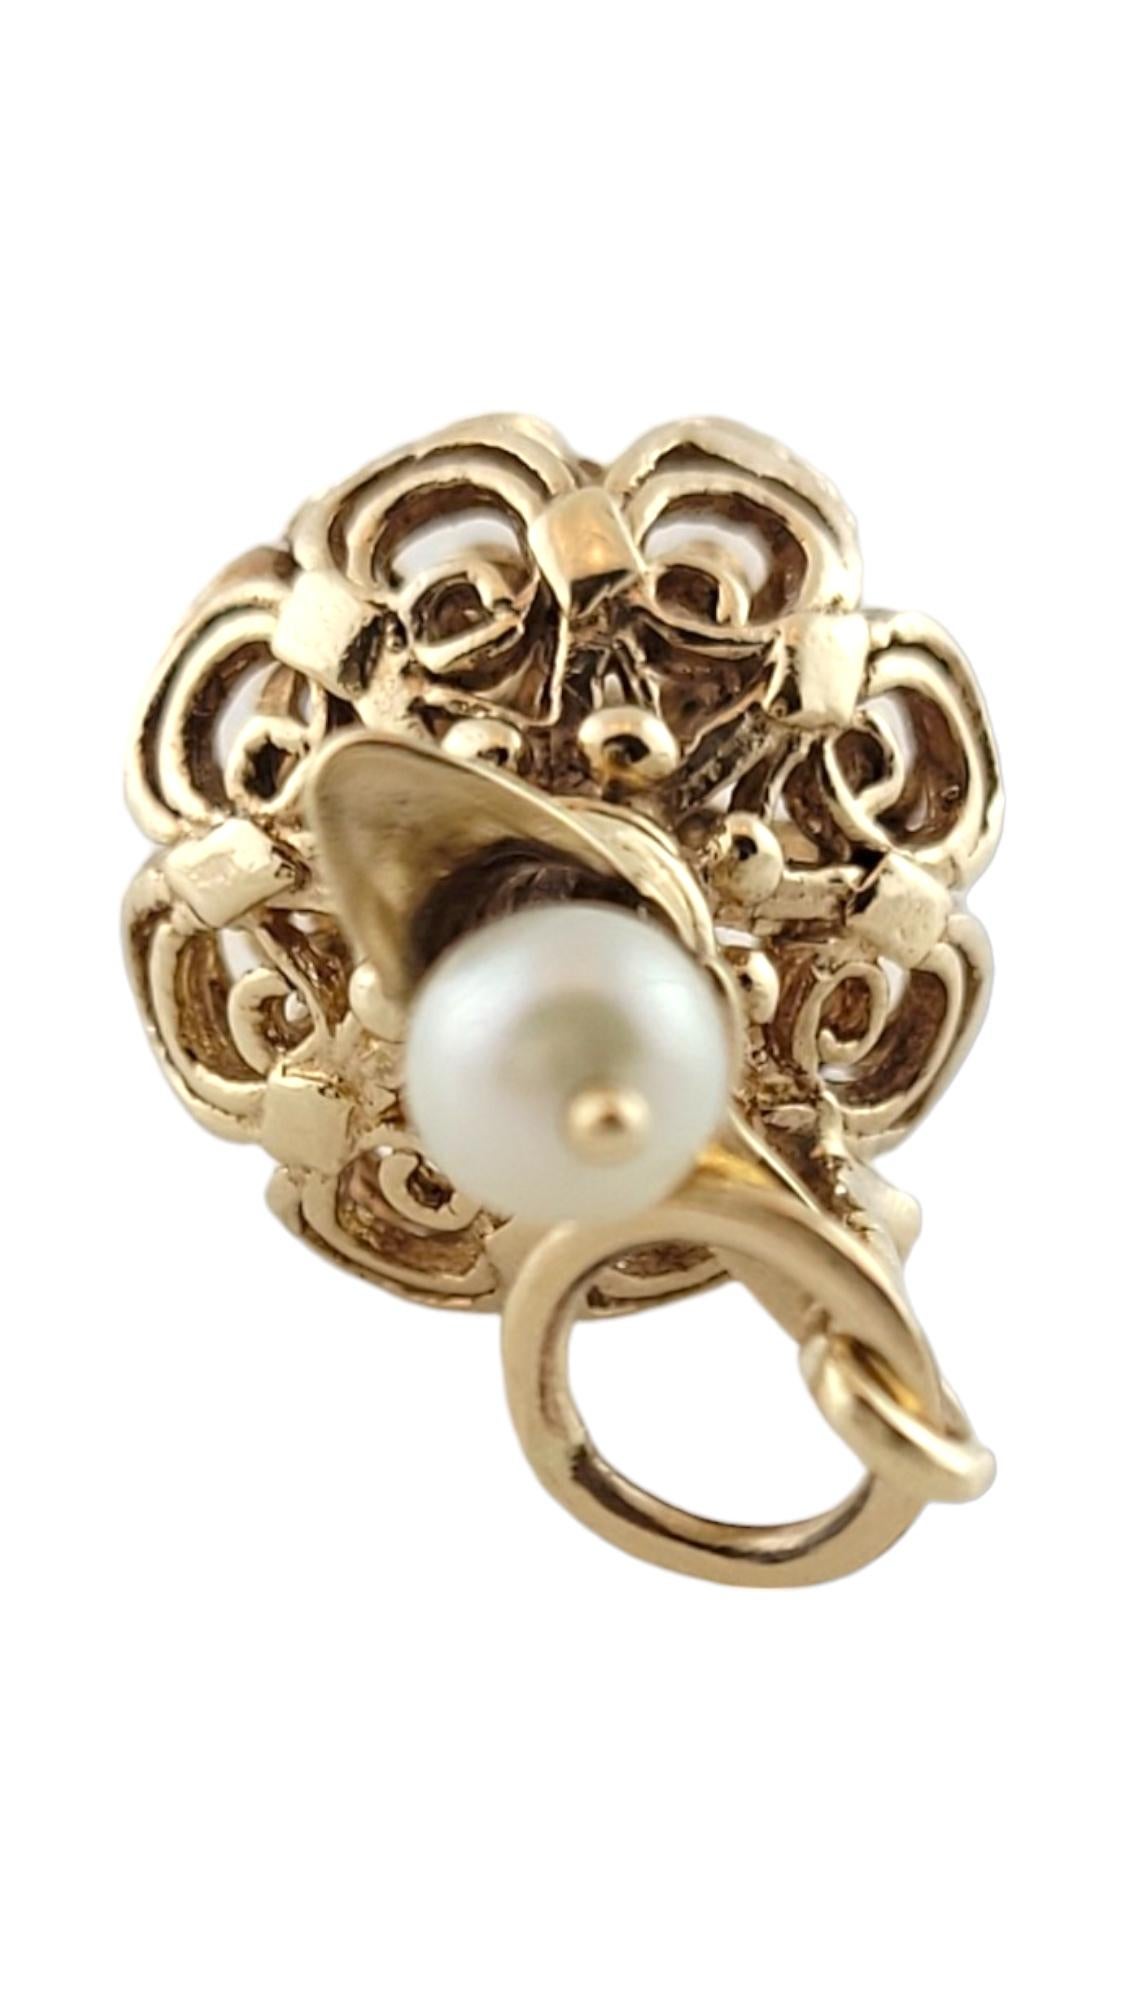 14K Yellow Gold Open Design Pitcher Charm with Pearl #16161 For Sale 1